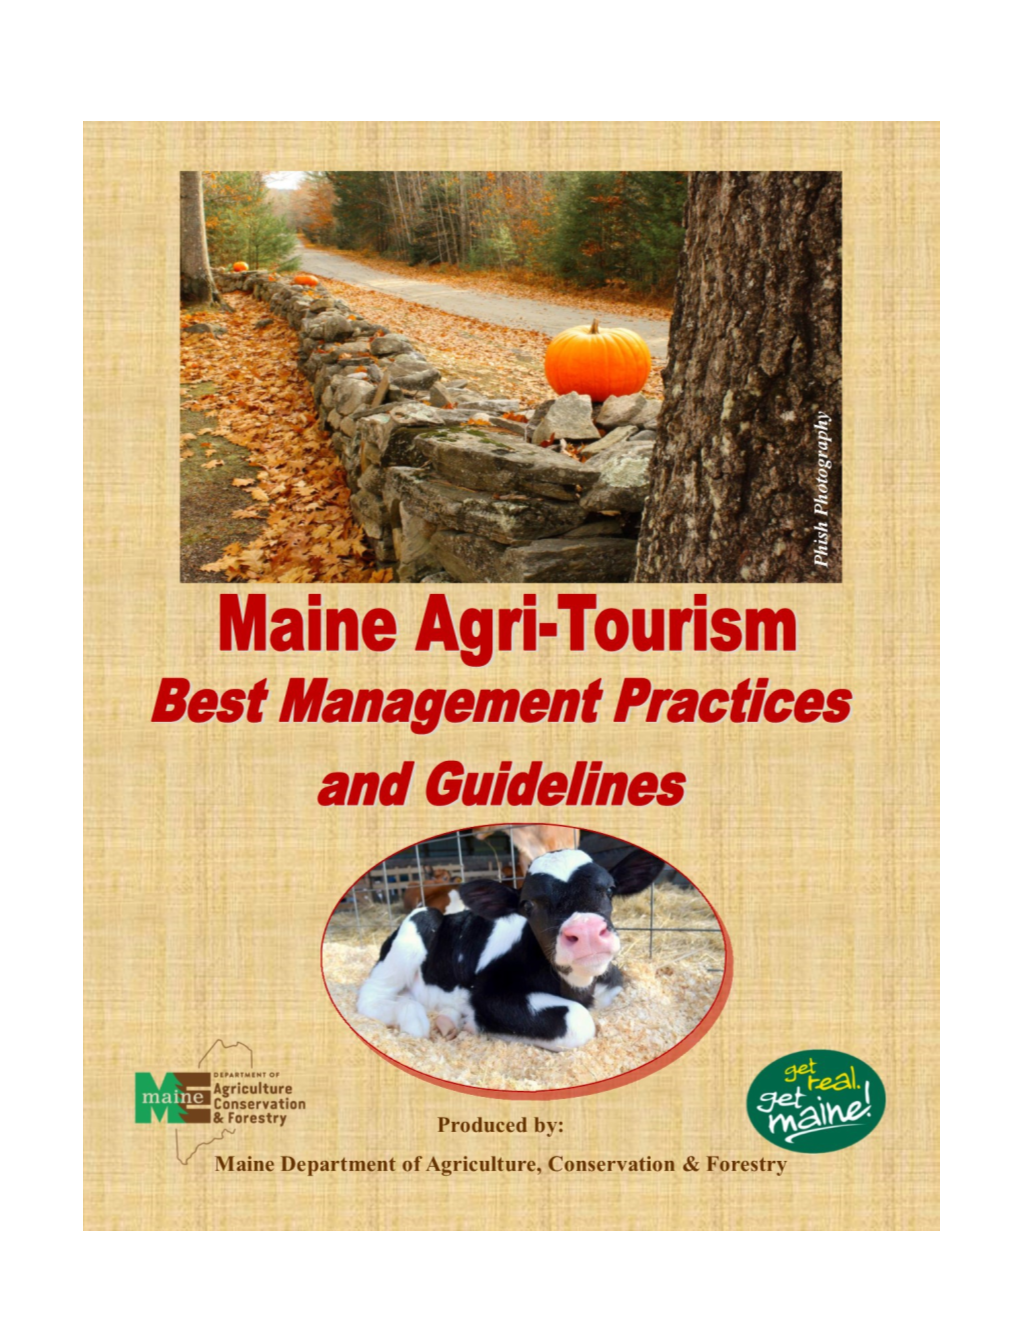 Maine Agritourism: Best Management Practices and Guidelines